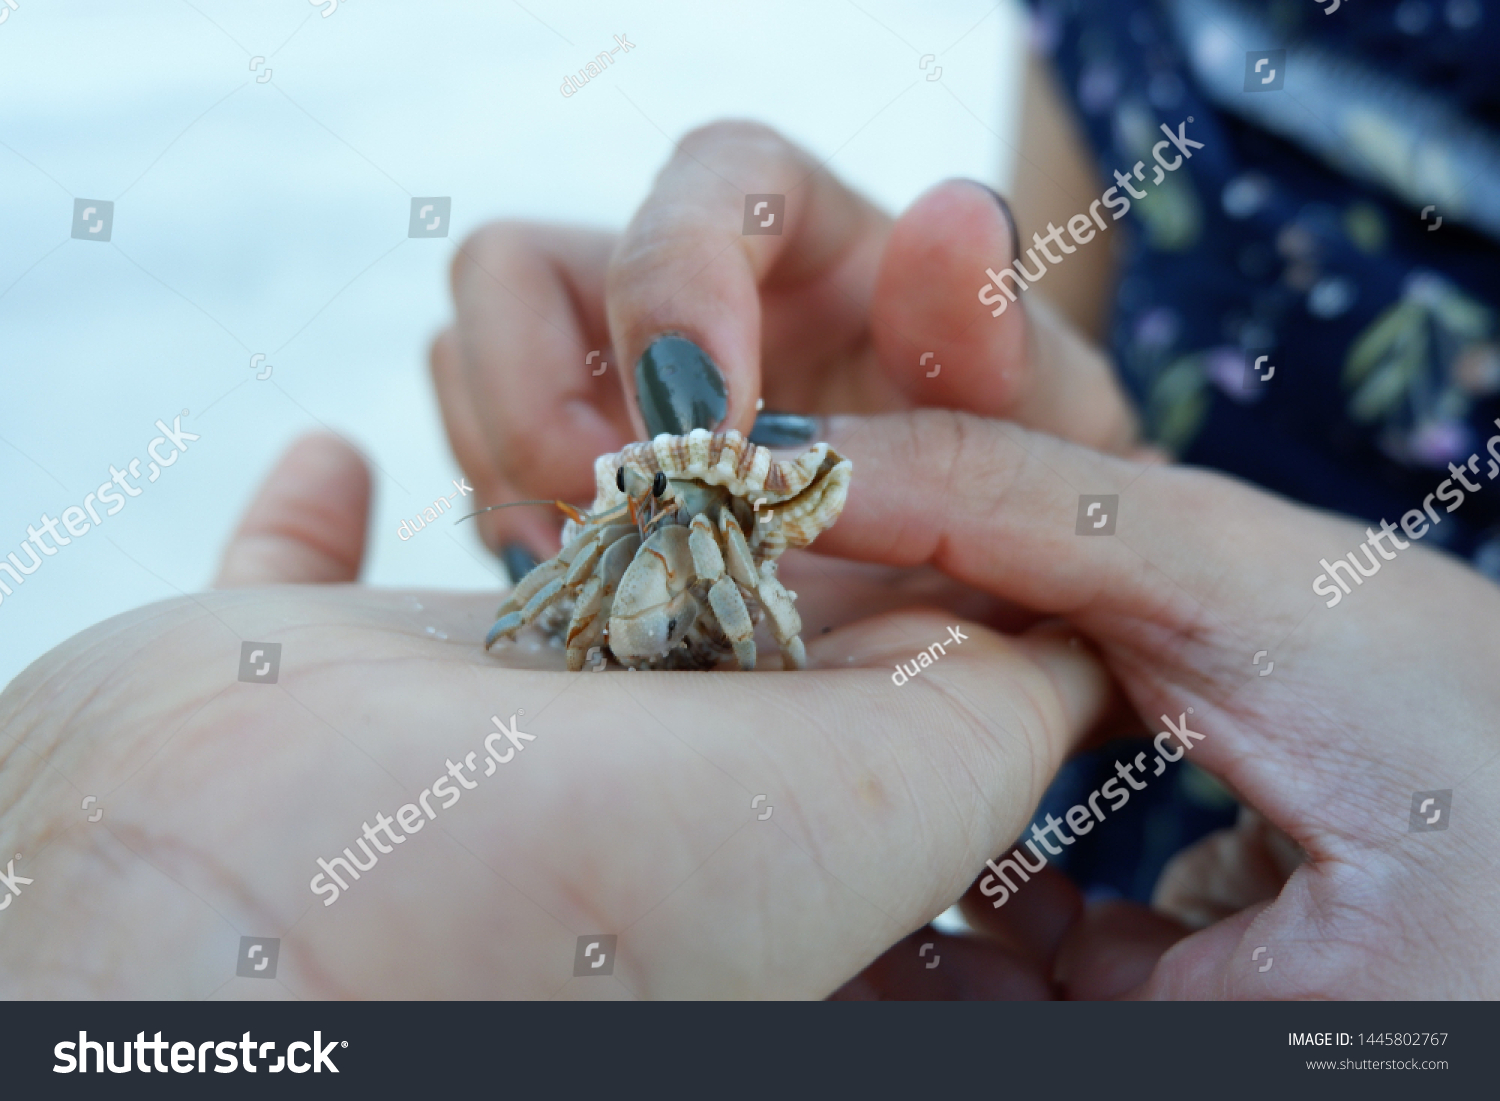 hermit crab grows in size, it must find a larger shell and abandon the previous one. Several hermit crab species, both terrestrial and marine, in adang island Thailand #1445802767